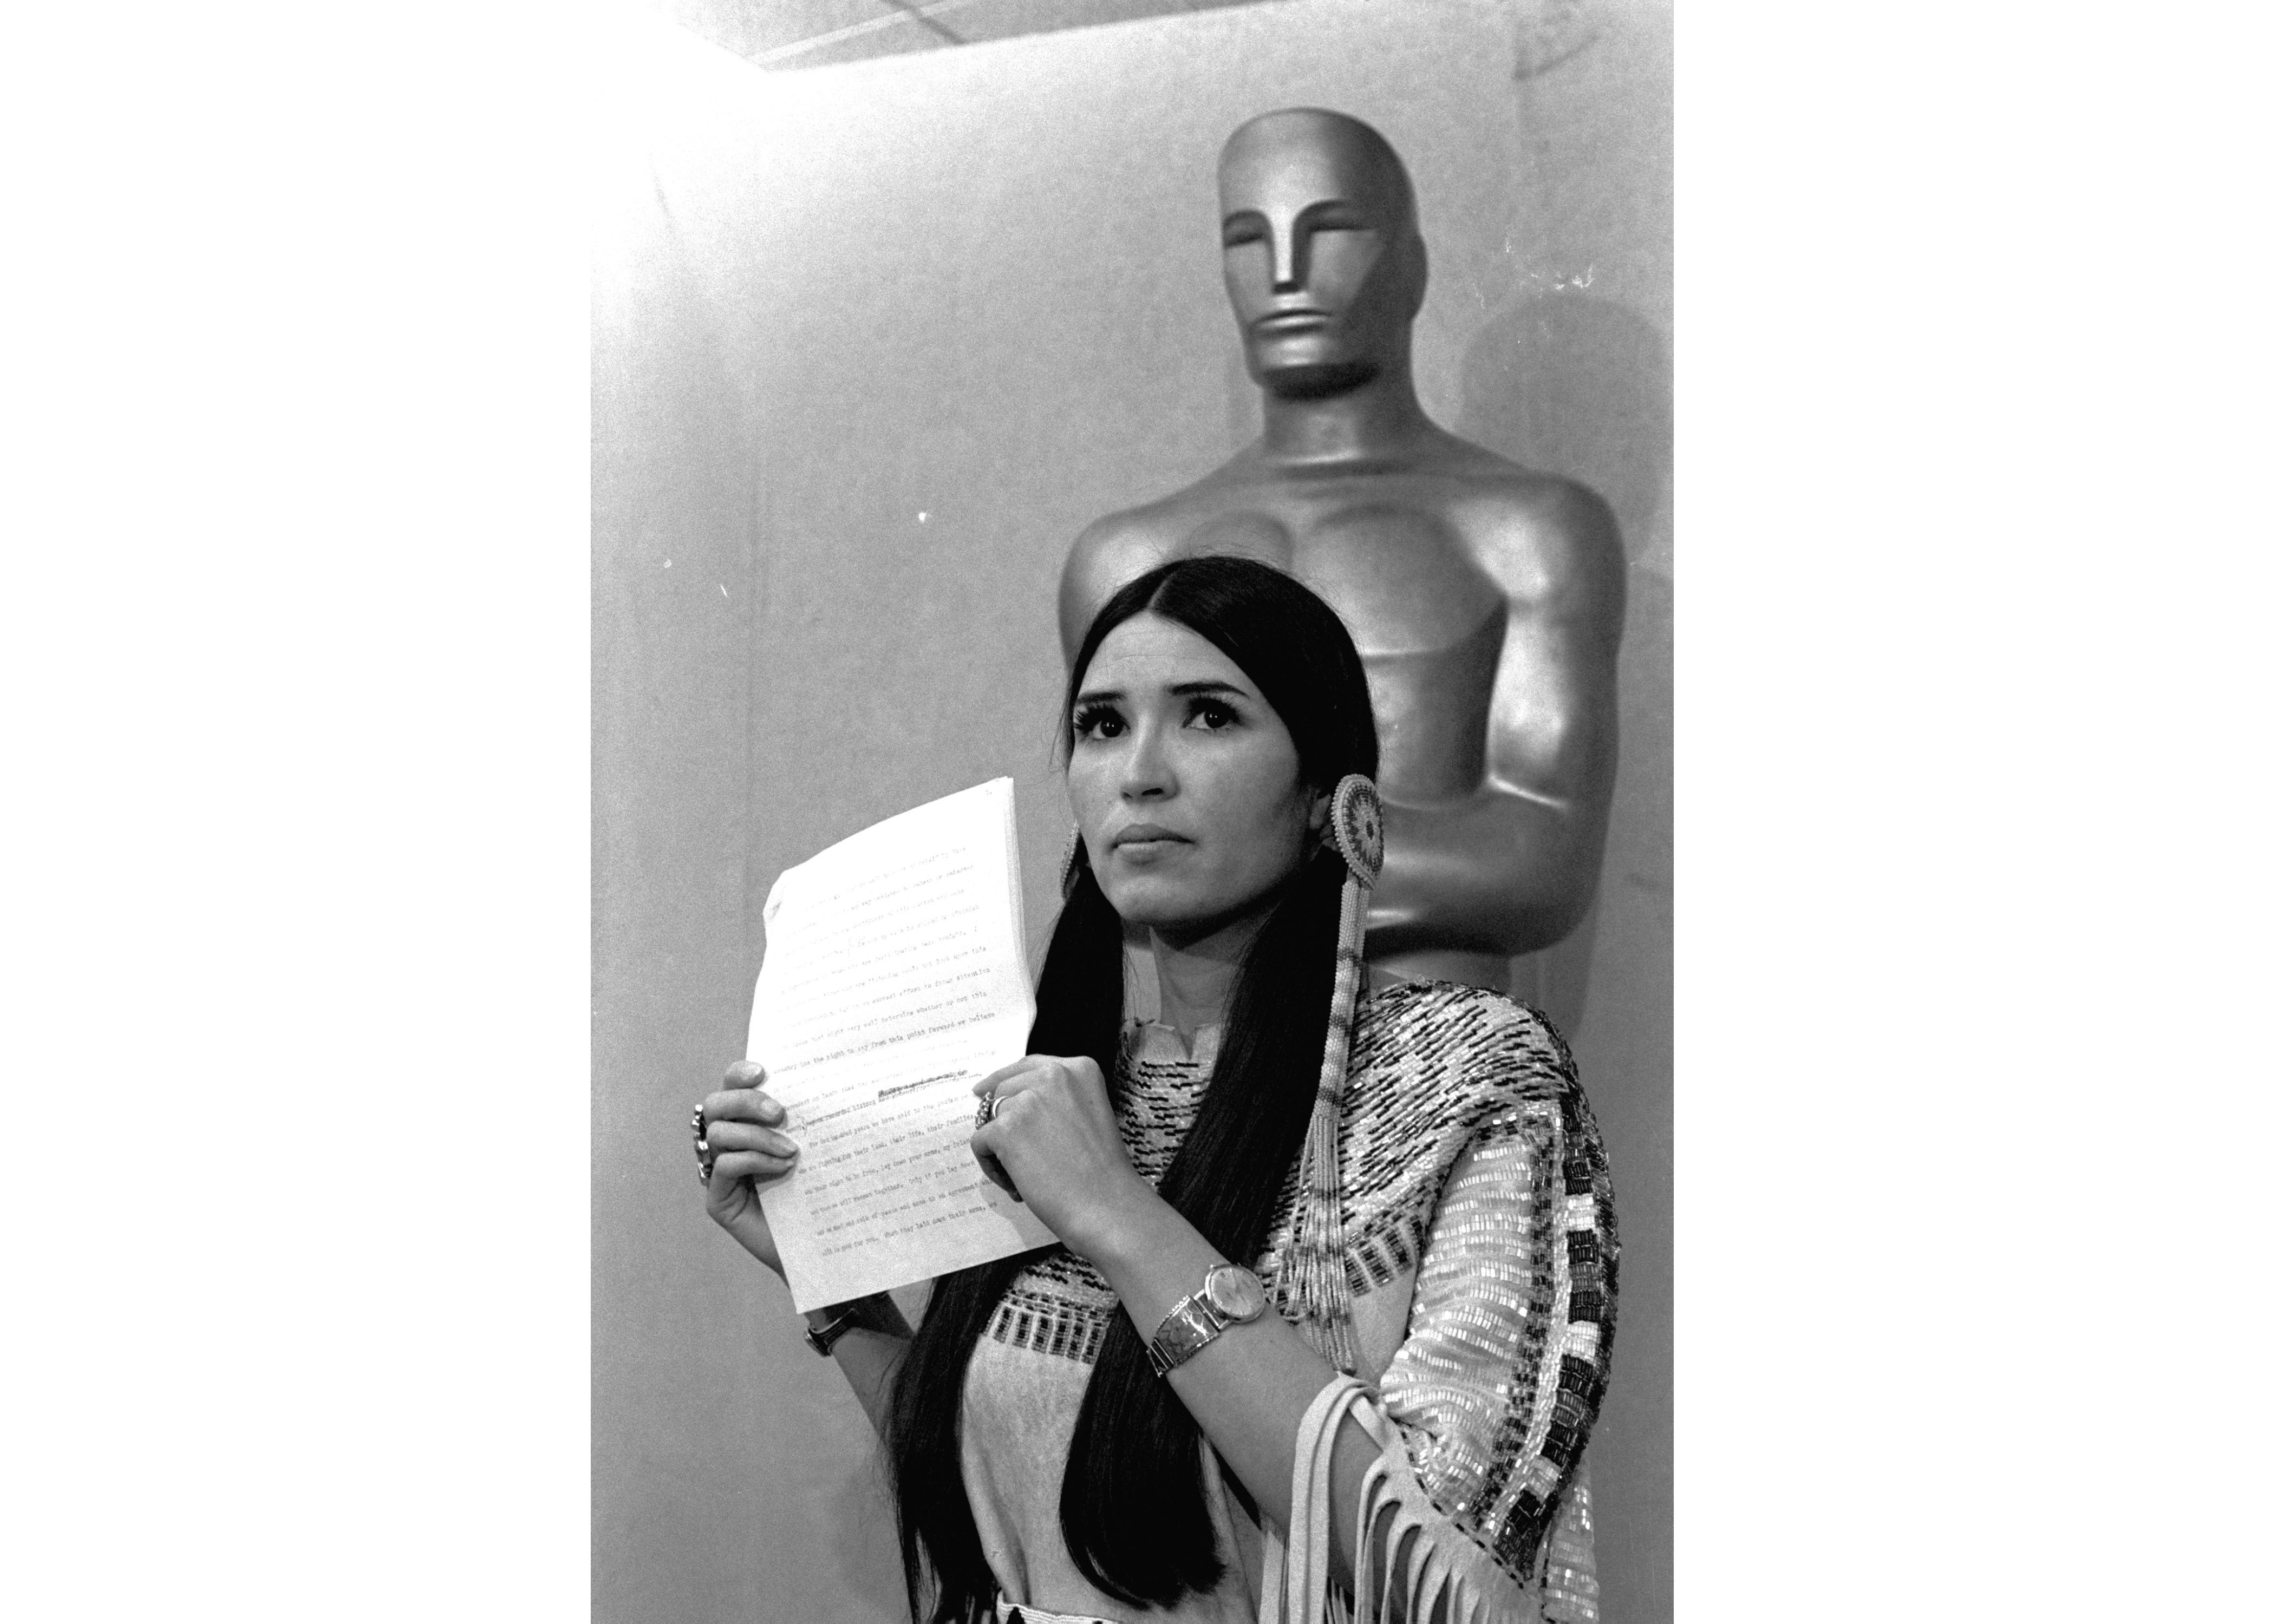 The activist holds up her speech at the 1973 Academy Awards